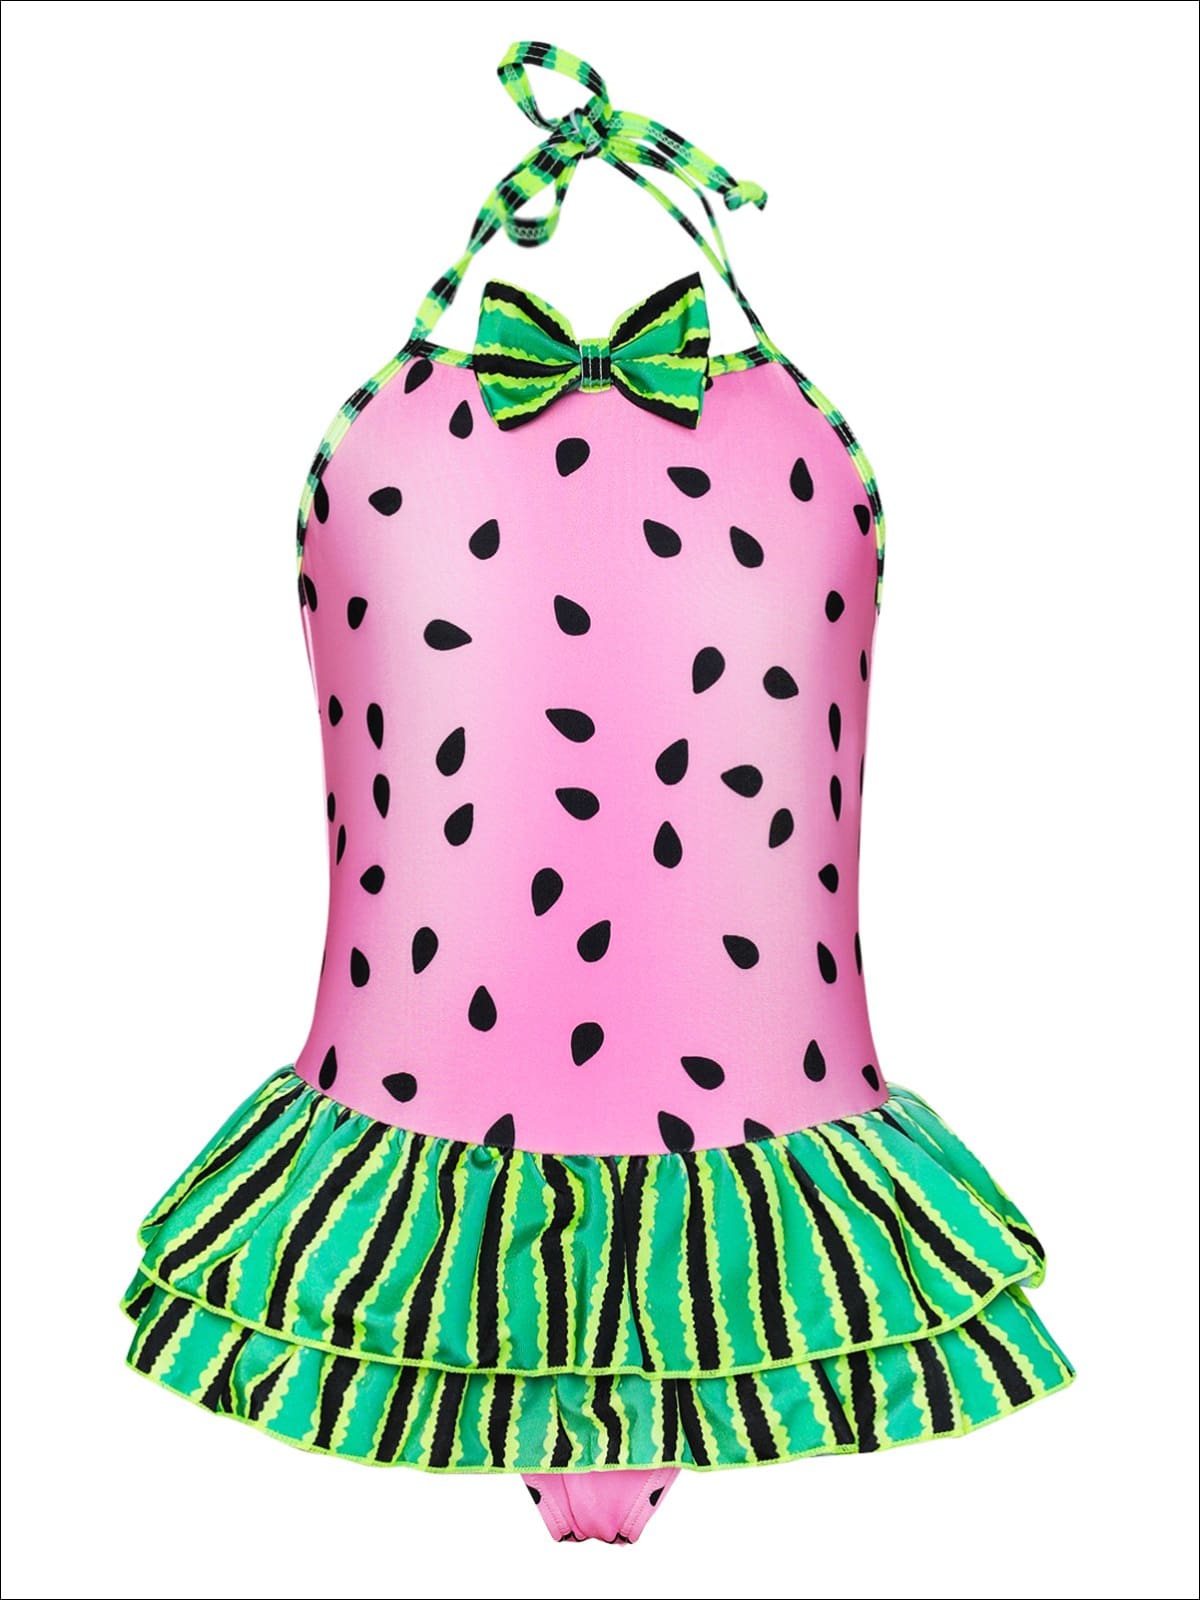 Watermelon Print Skirted One Piece Swimsuit - Girls One Piece Swimsuit